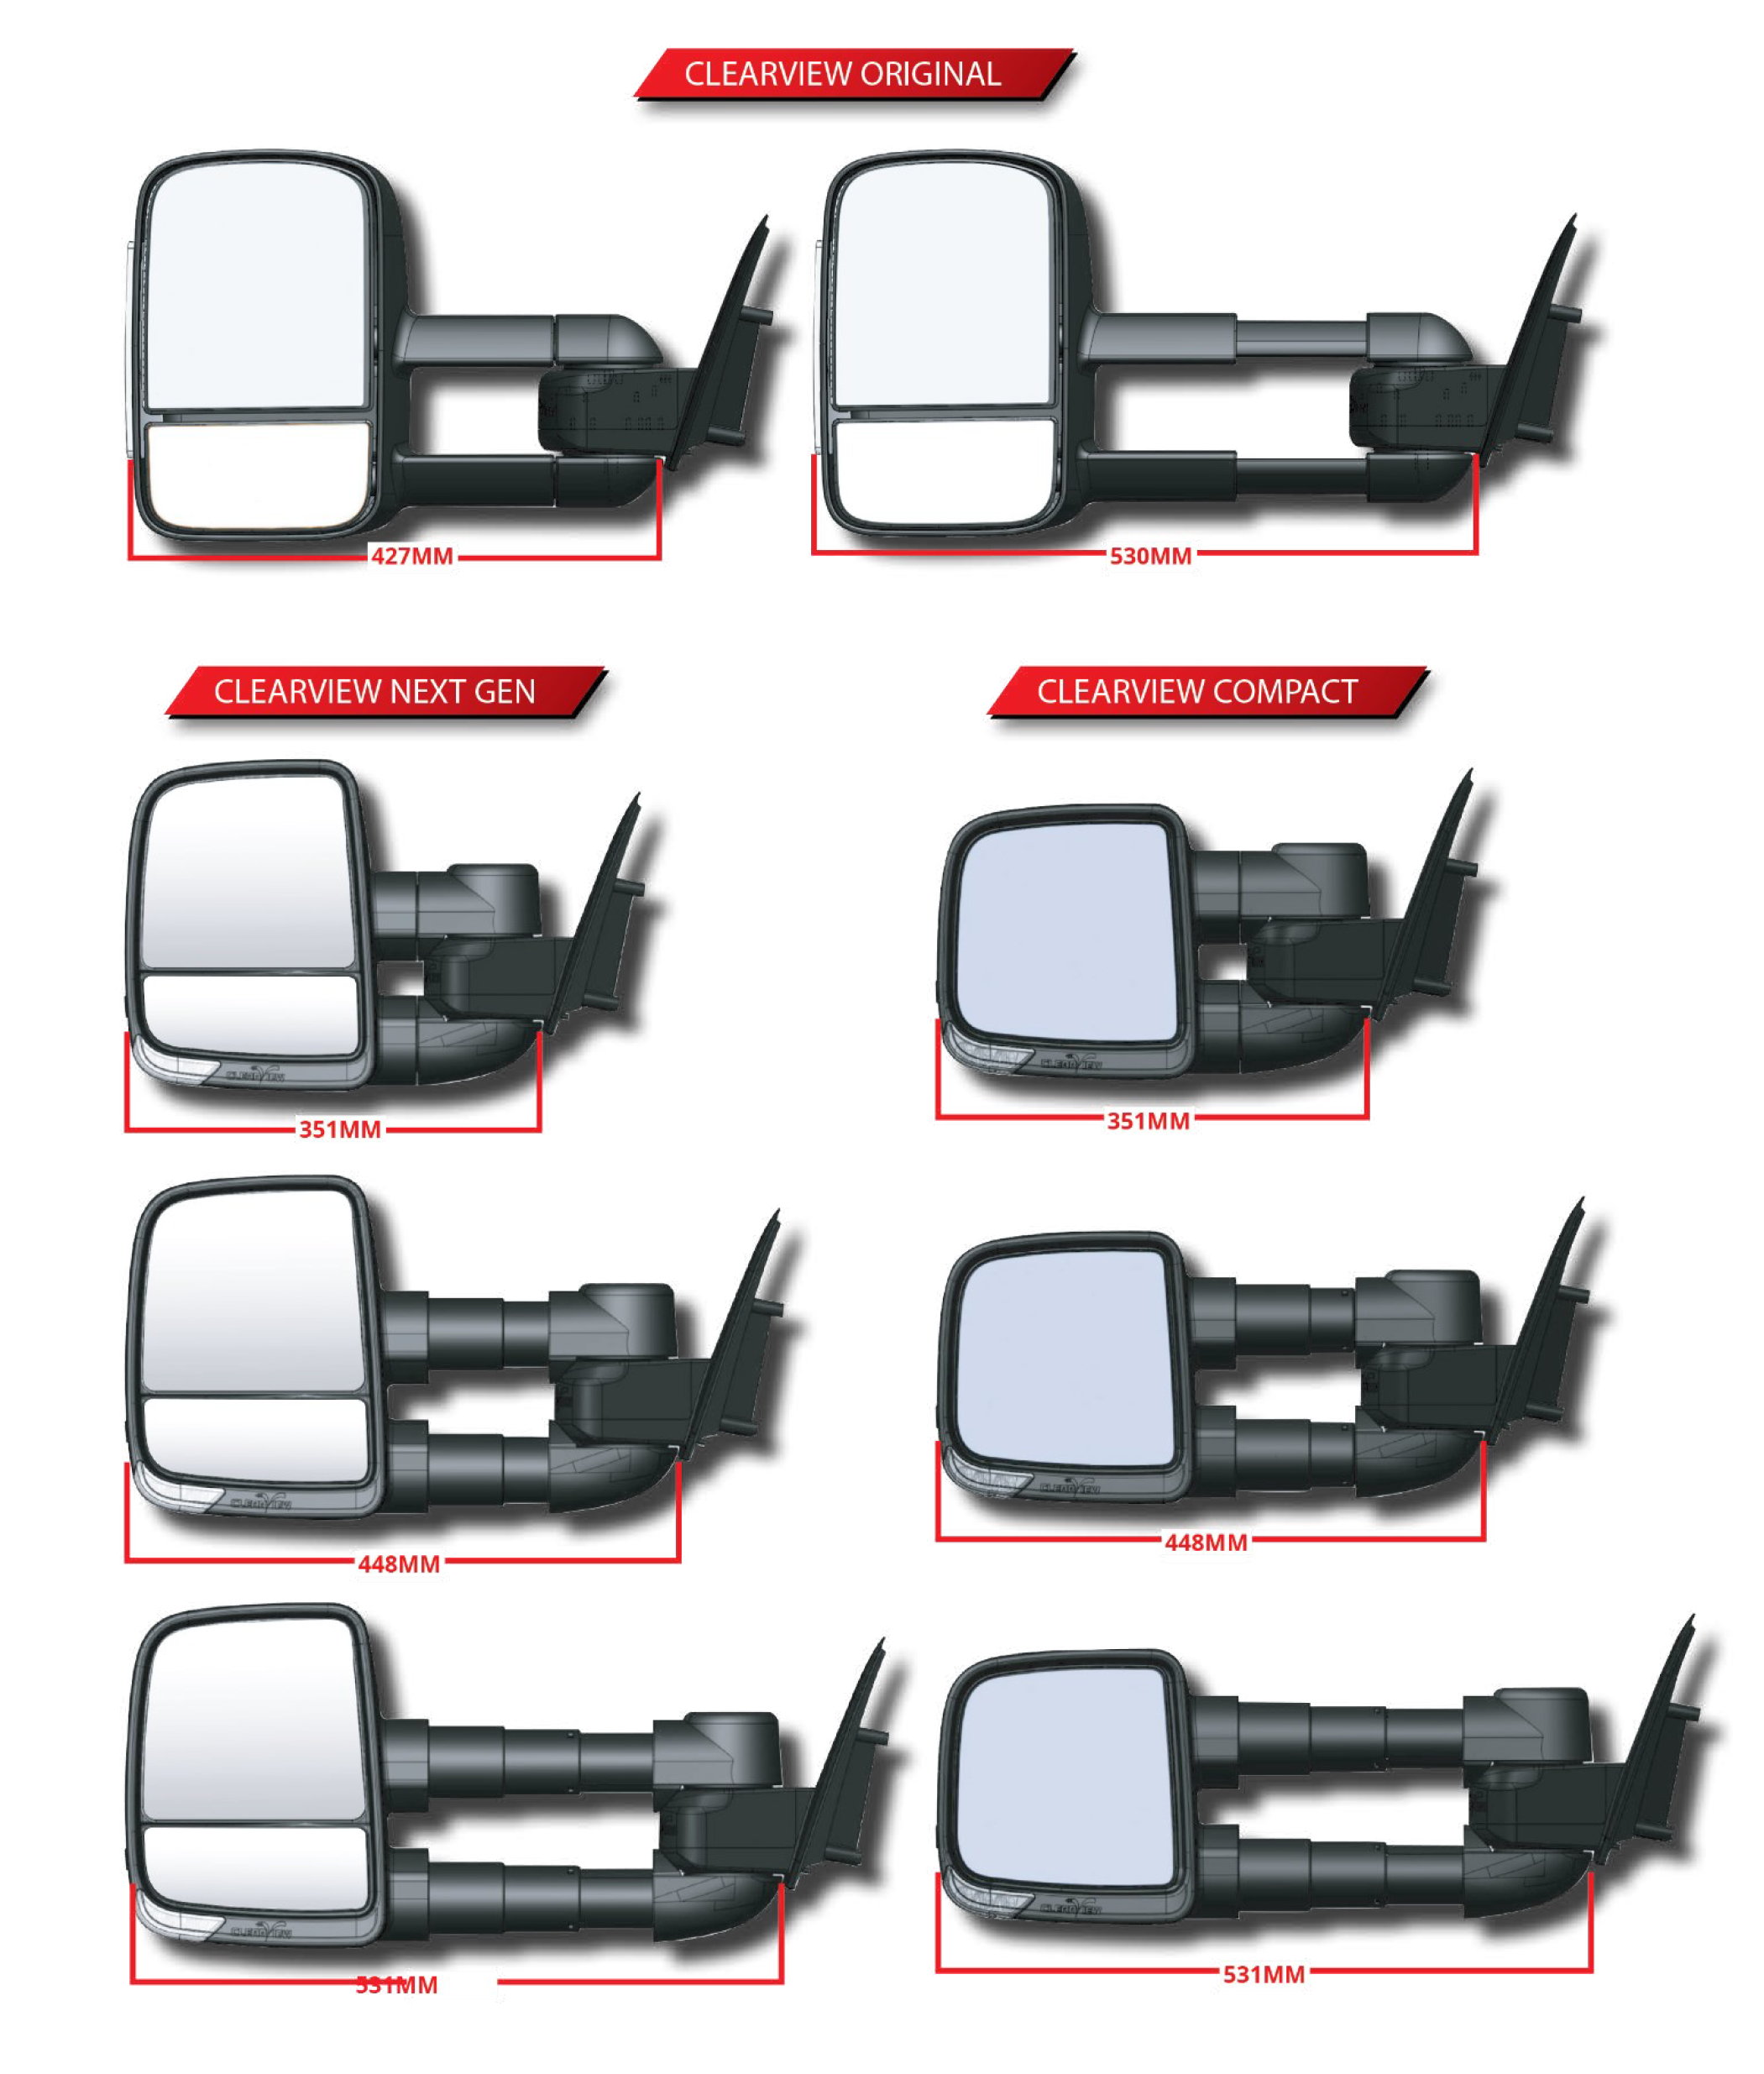 Isuzu D-Max (2012-2020) Clearview Towing Mirrors